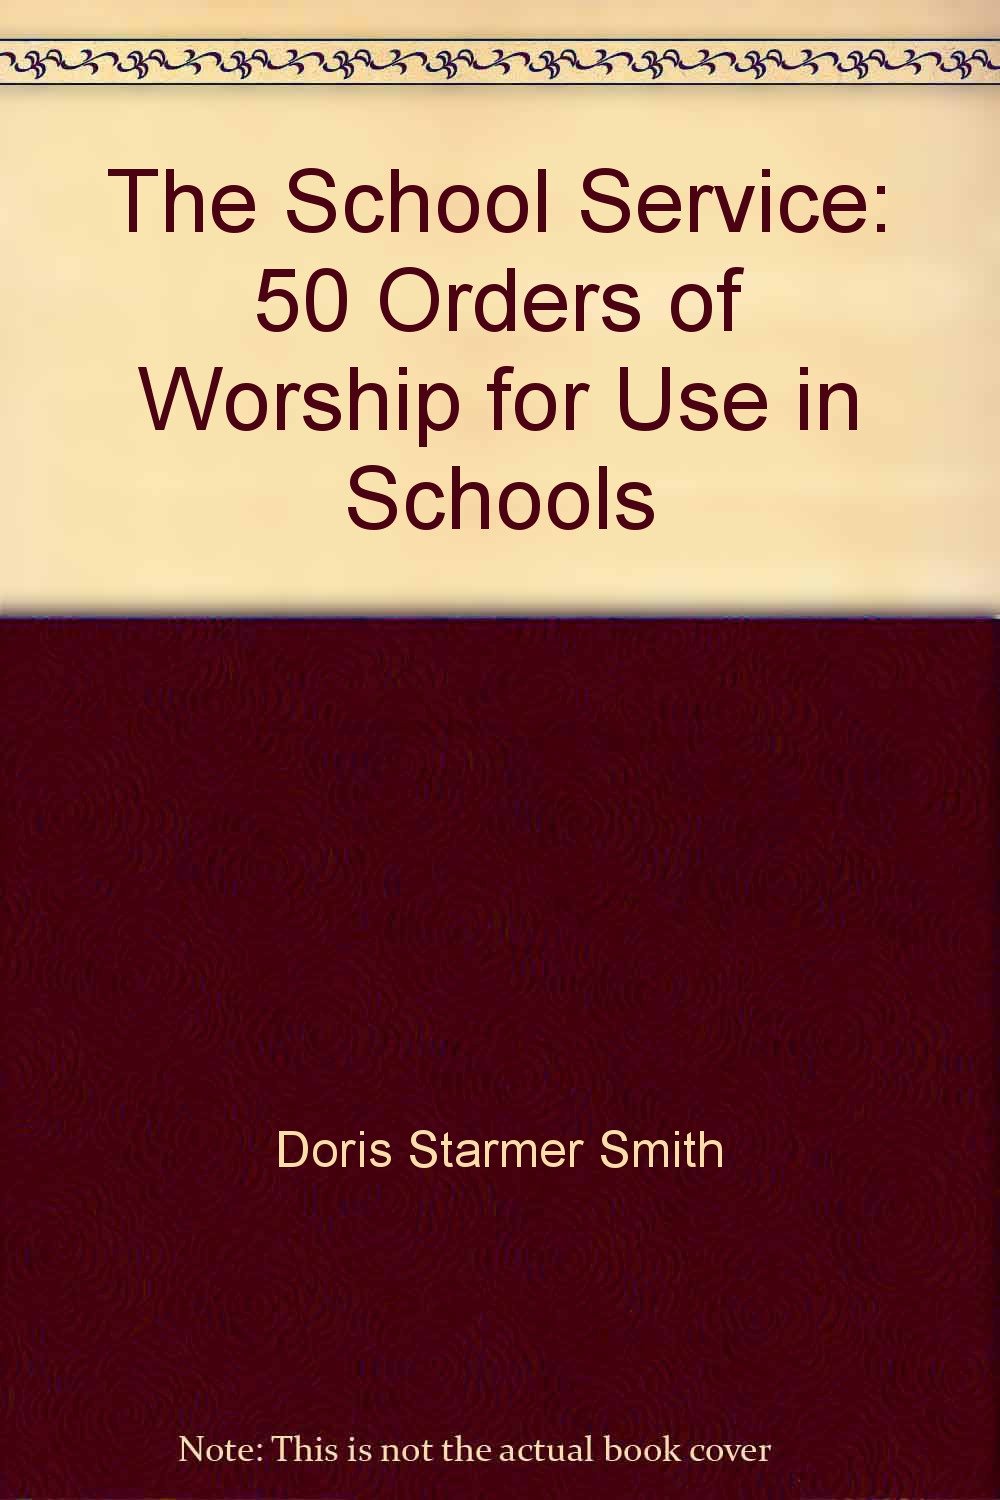 The School Service: 50 Orders of Worship for Use in Schools